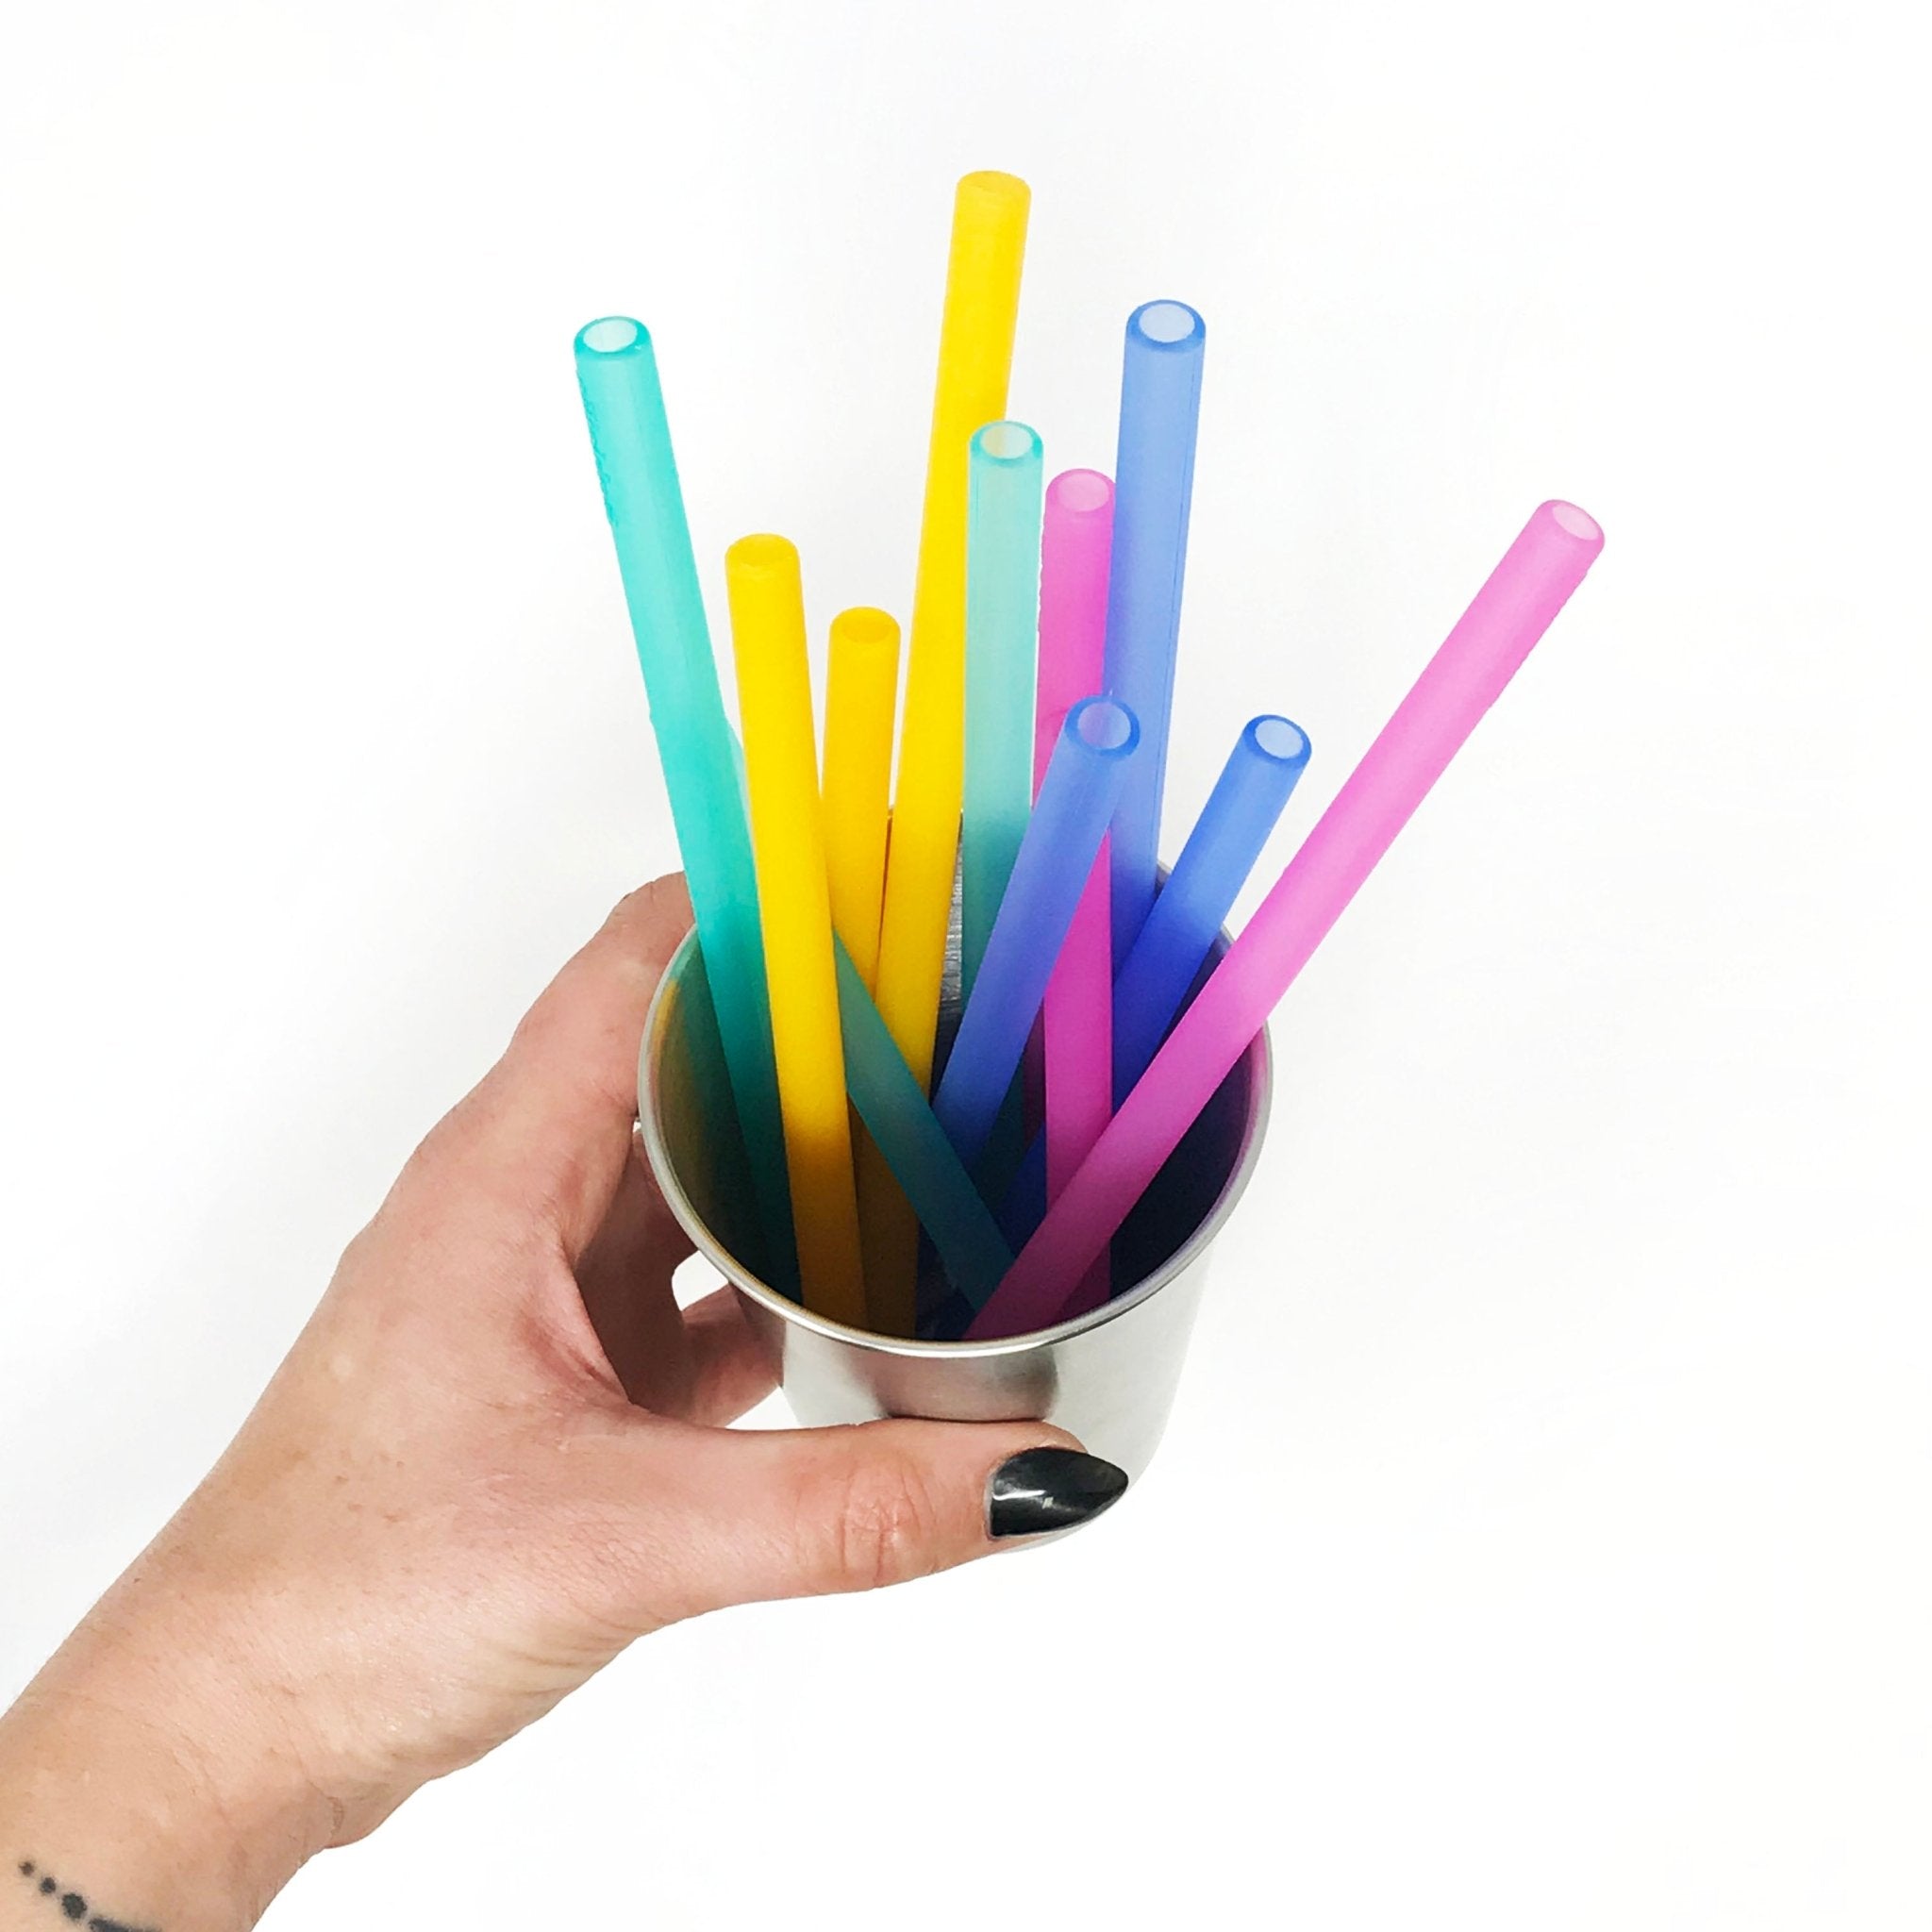  RUNROTOO 30Pcs Silicone Straw Cover reusable straw